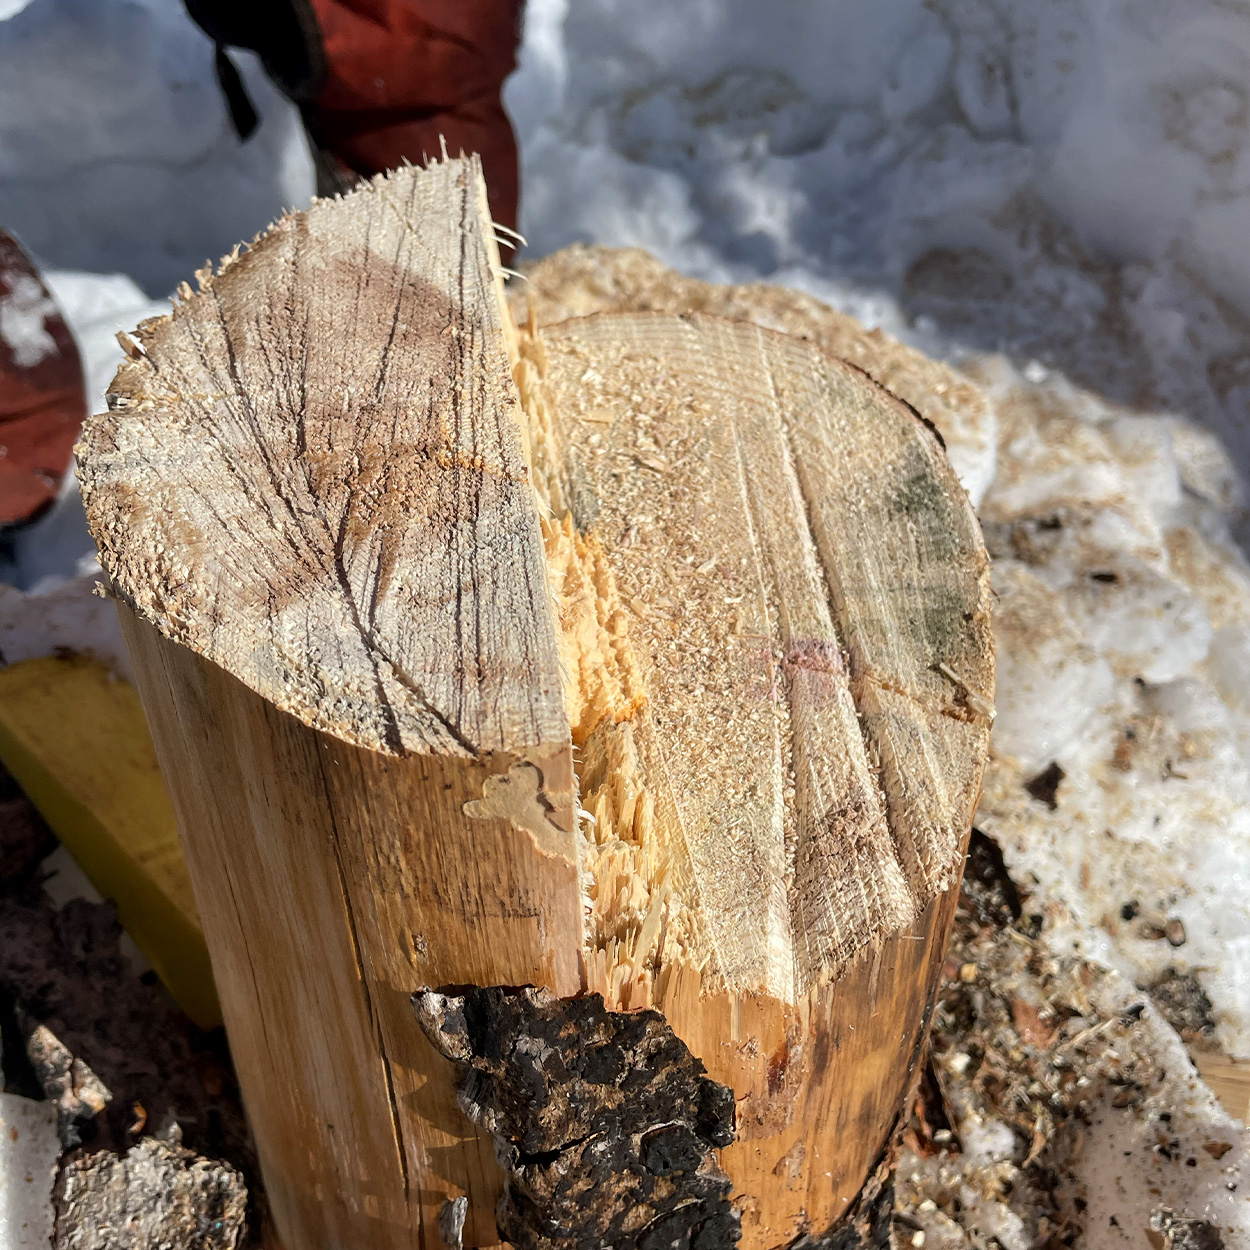 A closeup look at the stump after felling a tree.